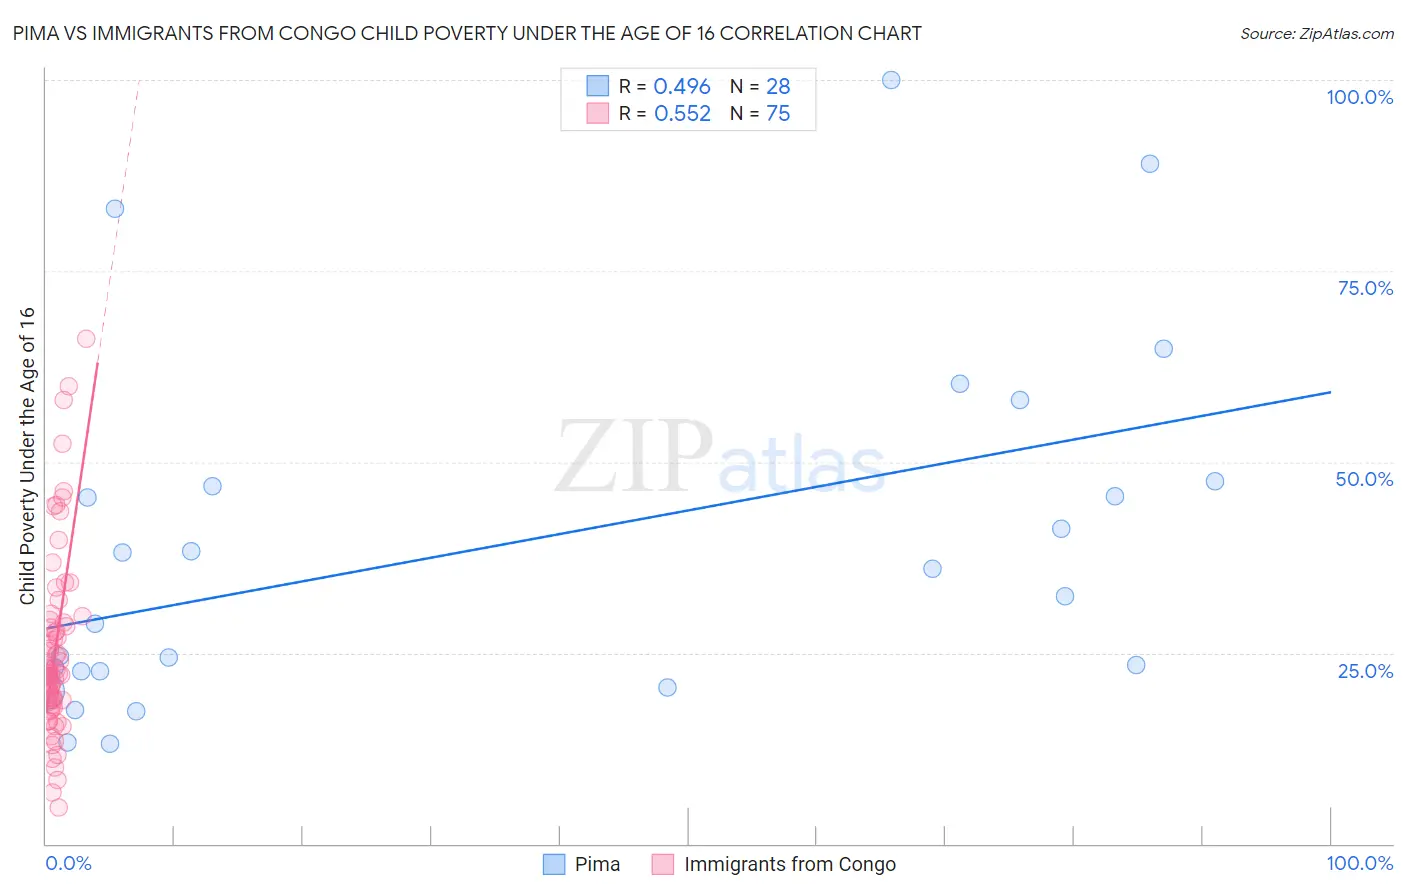 Pima vs Immigrants from Congo Child Poverty Under the Age of 16